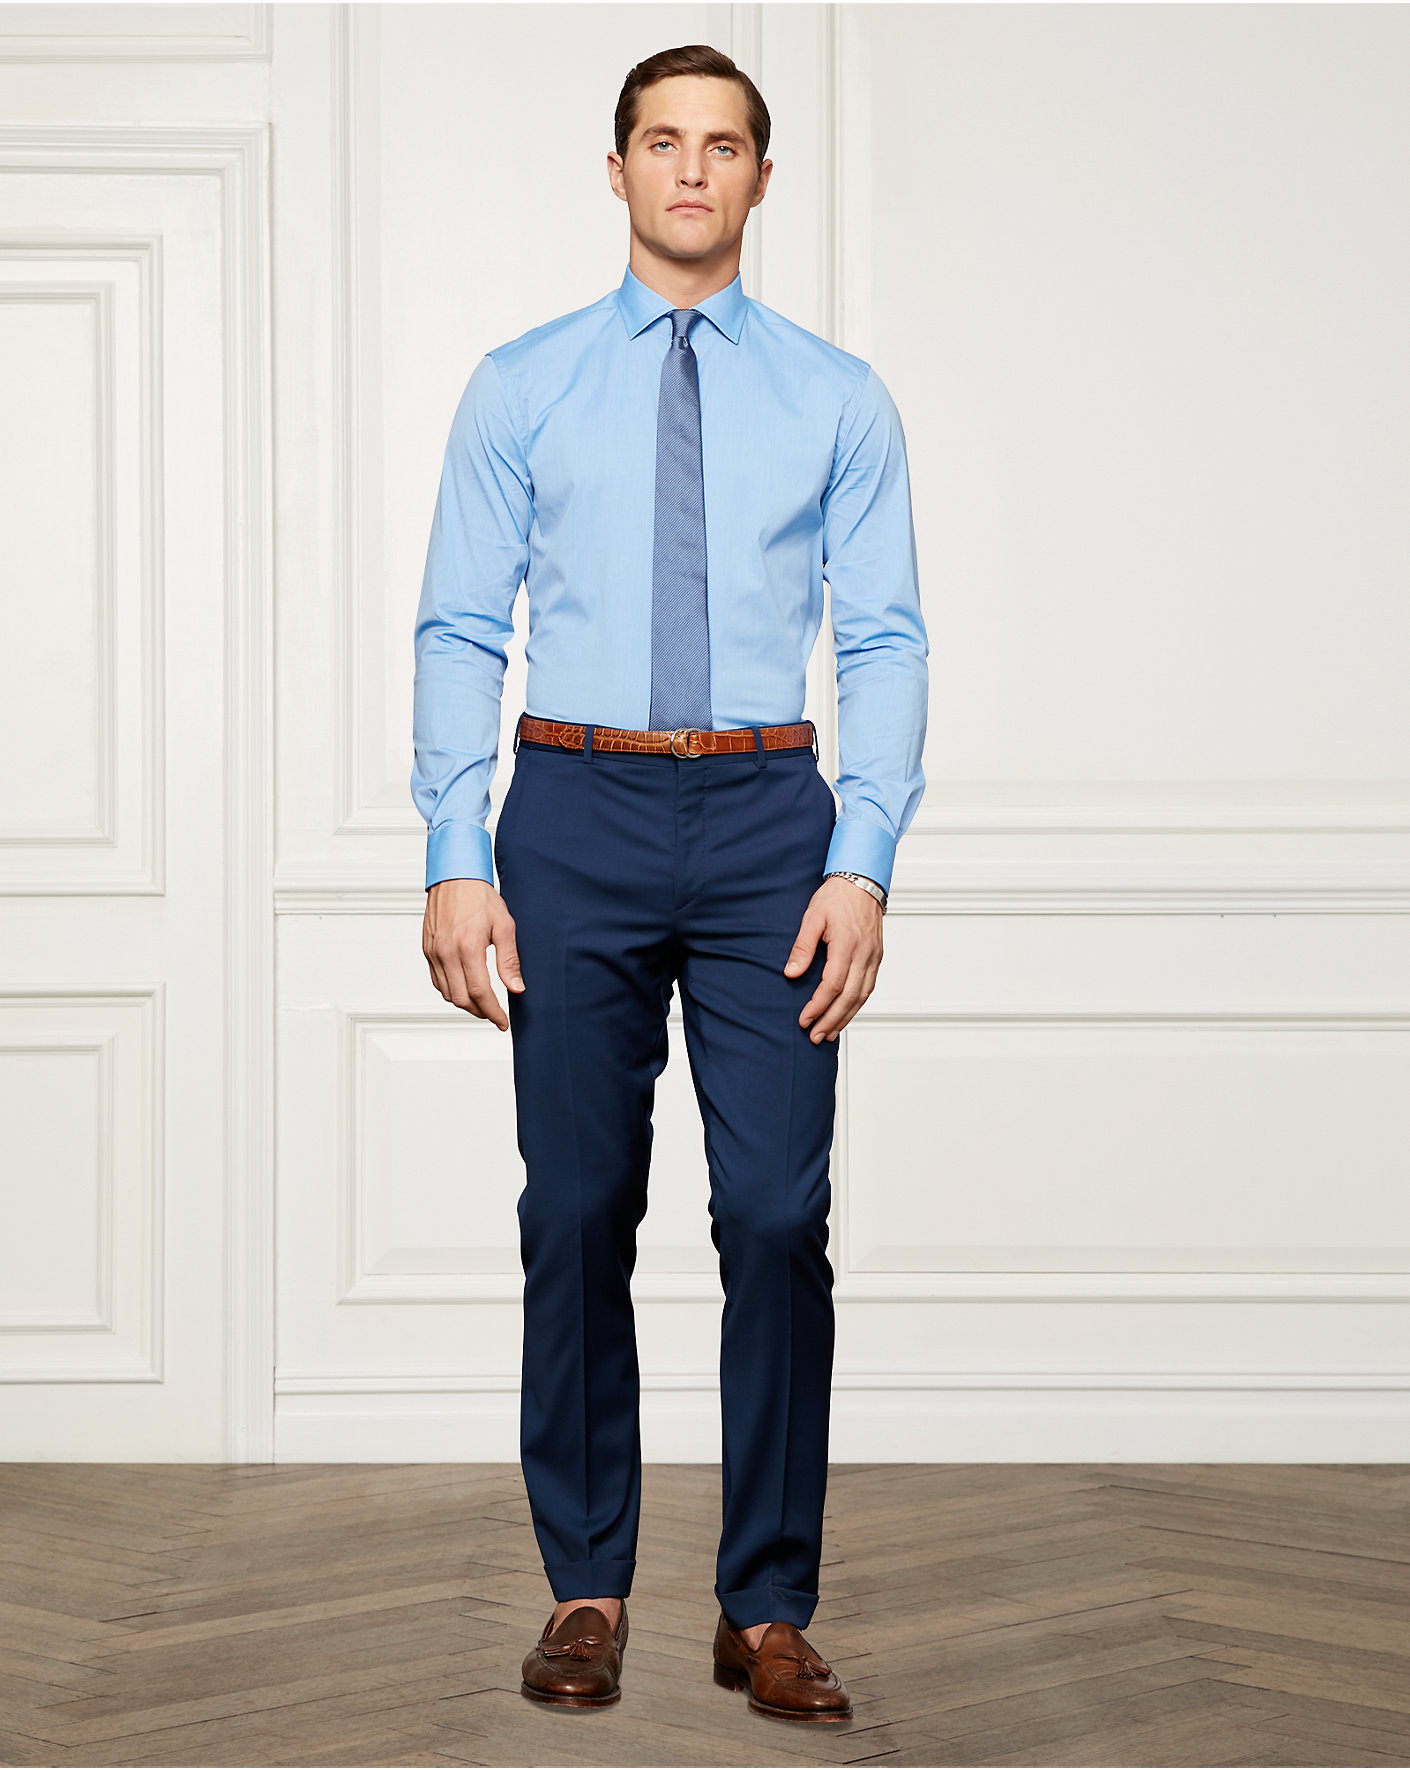 MALE MODELS IN SUITS: Ollie Edwards for Ralph Lauren